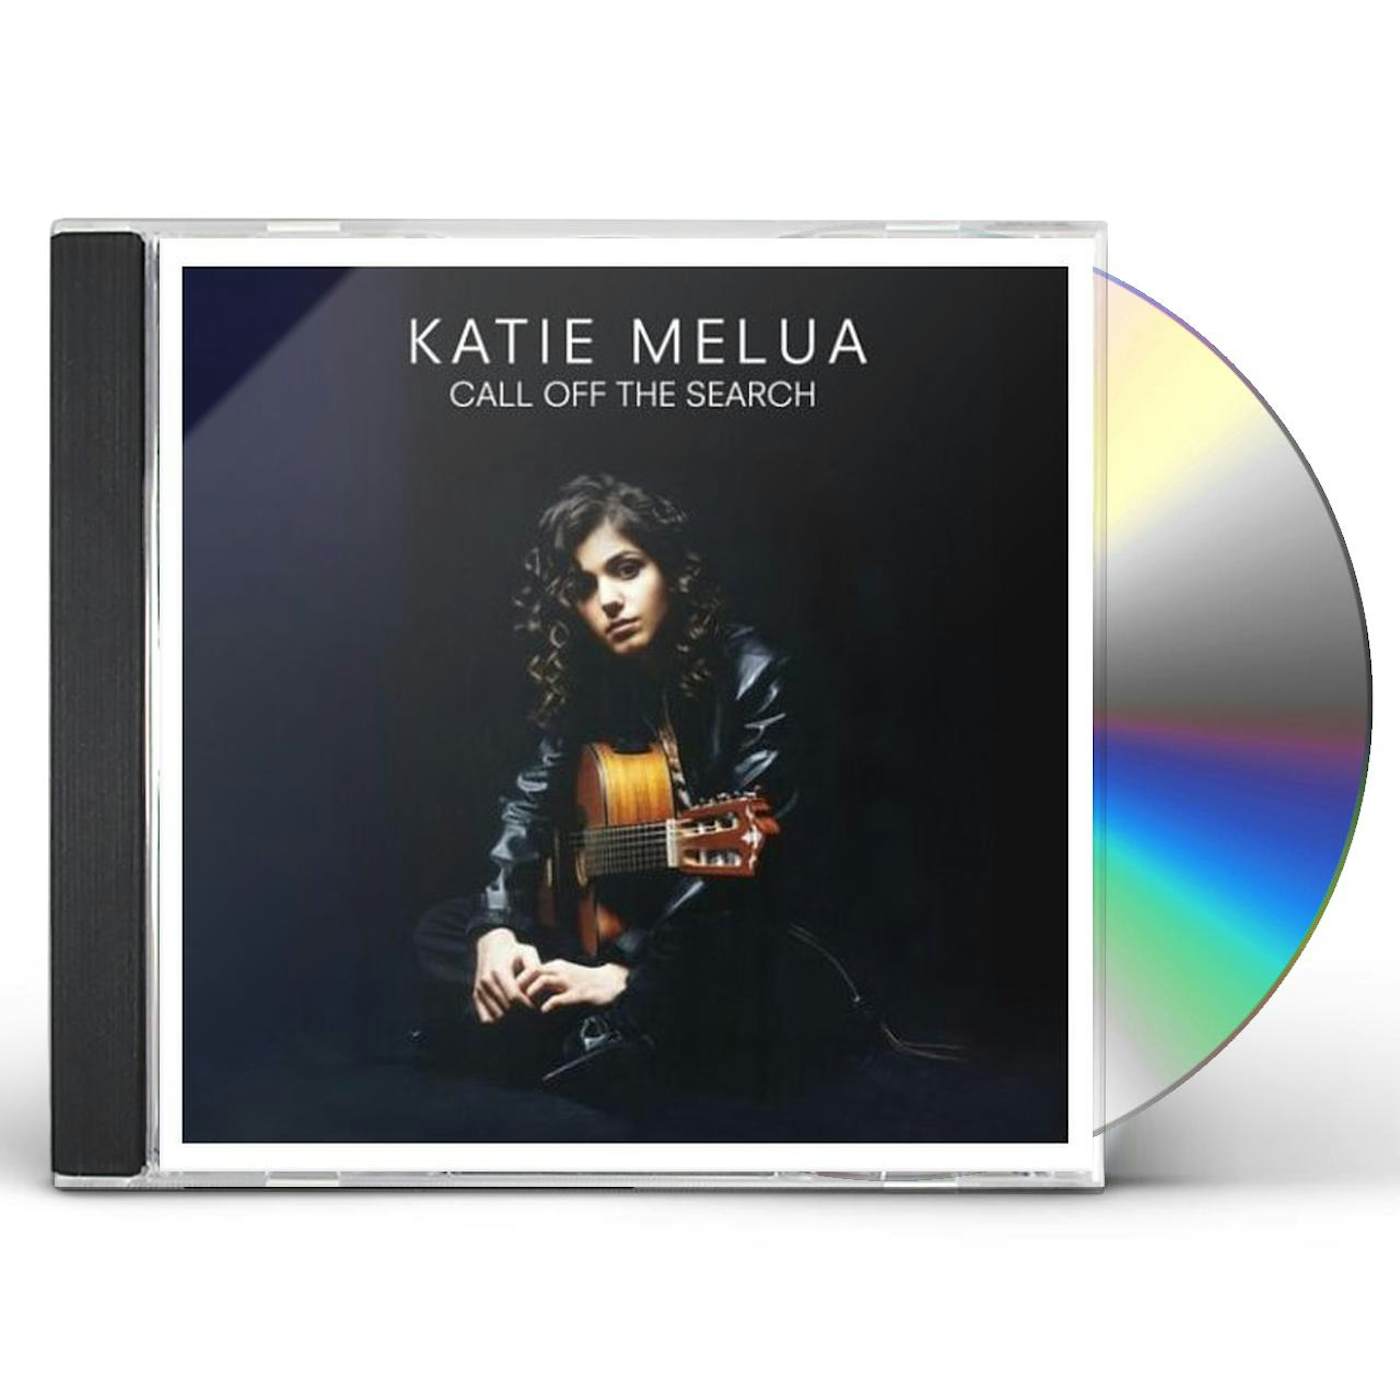 Katie Melua CALL OFF THE SEARCH CD